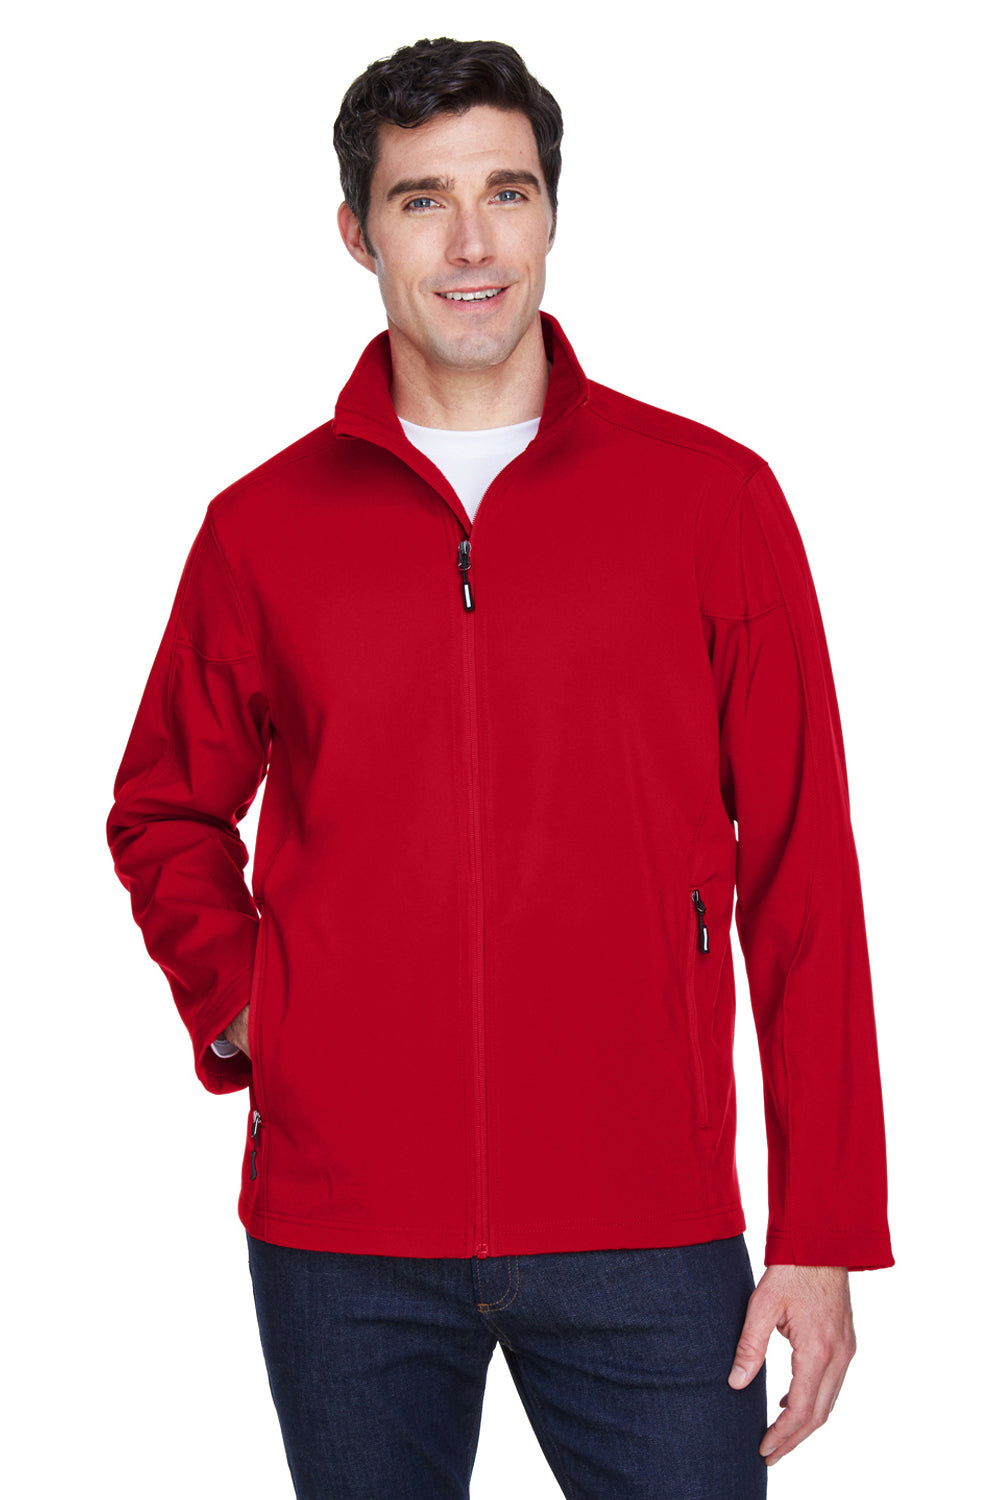 Core 365 88184 Mens Cruise Water Resistant Full Zip Jacket Red Front